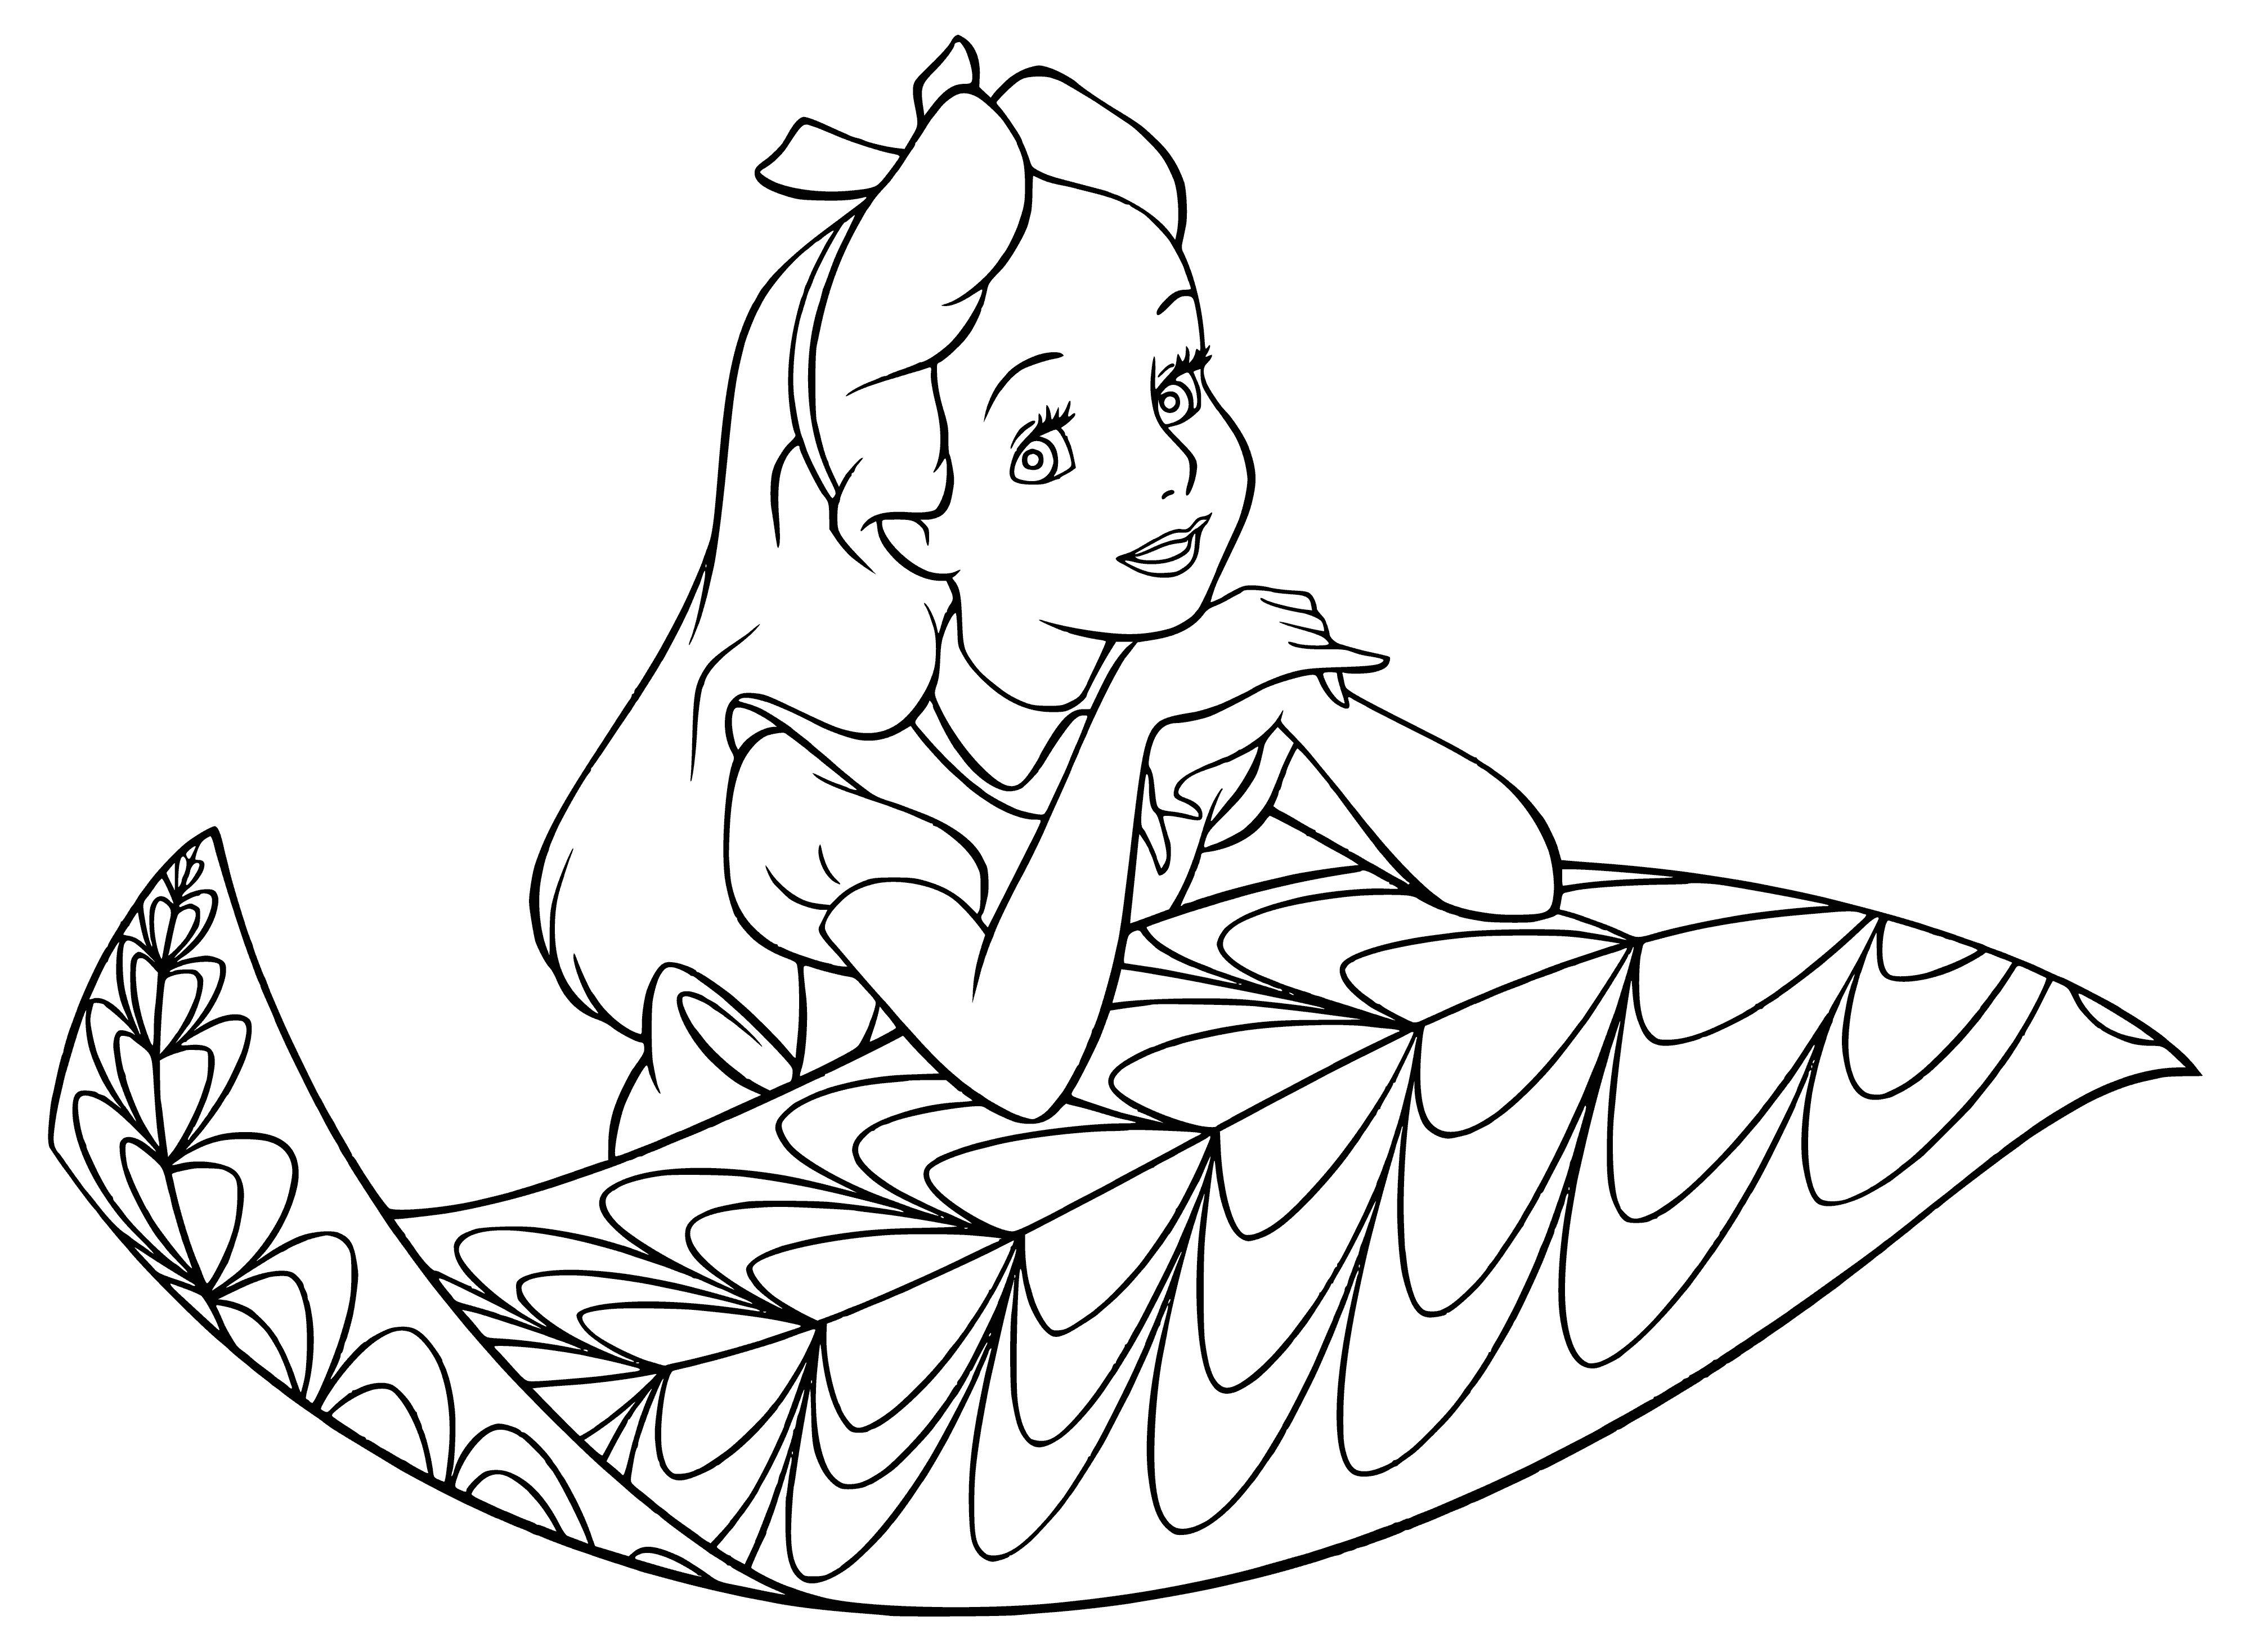 Alice coloring page